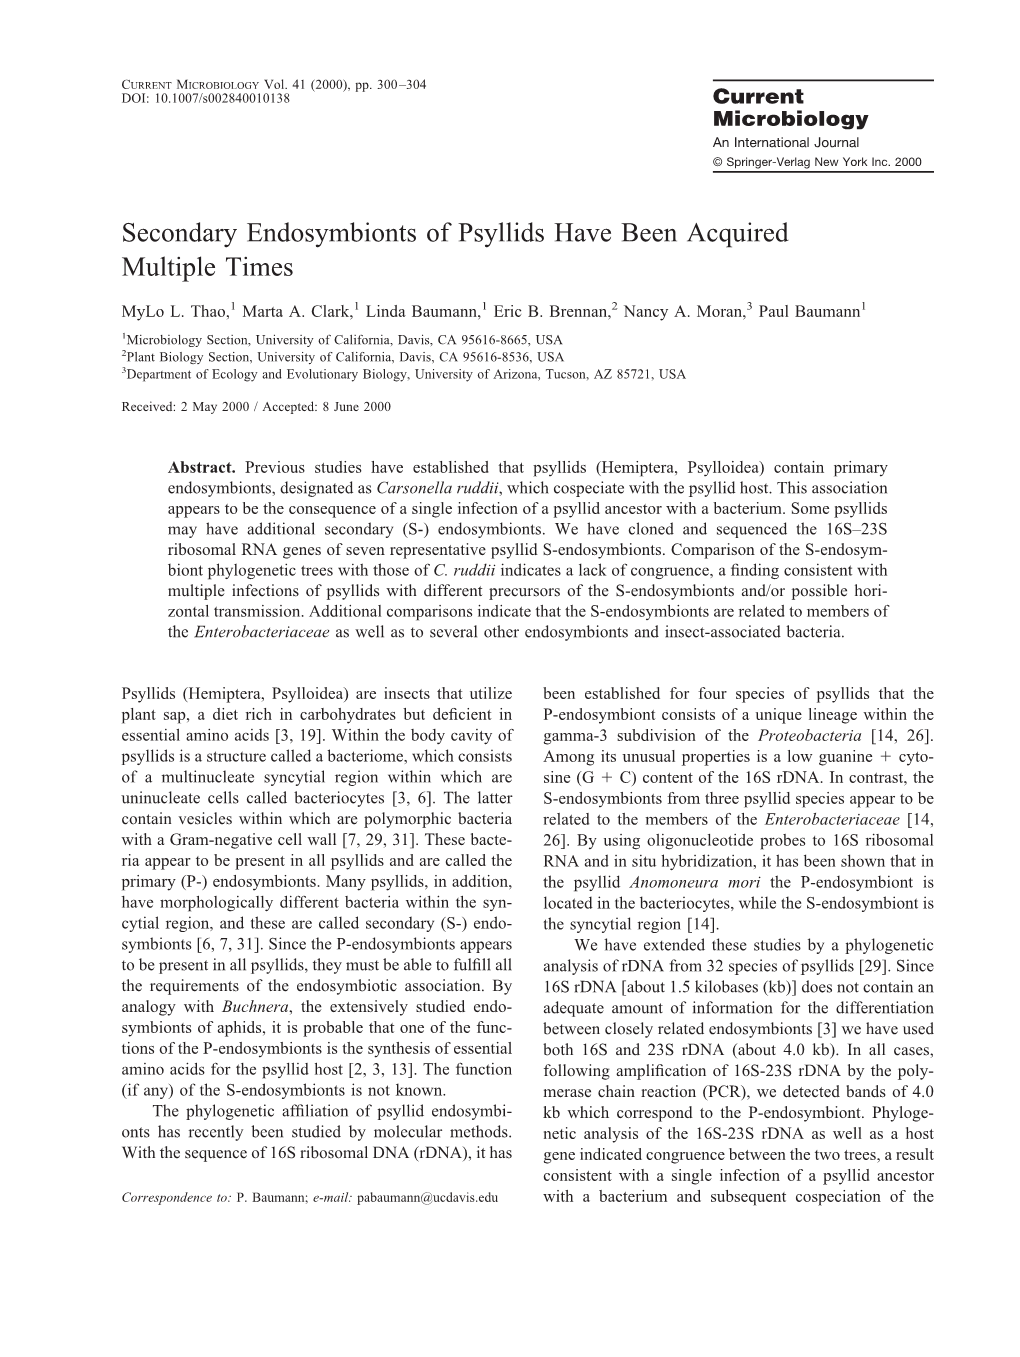 Secondary Endosymbionts of Psyllids Have Been Acquired Multiple Times